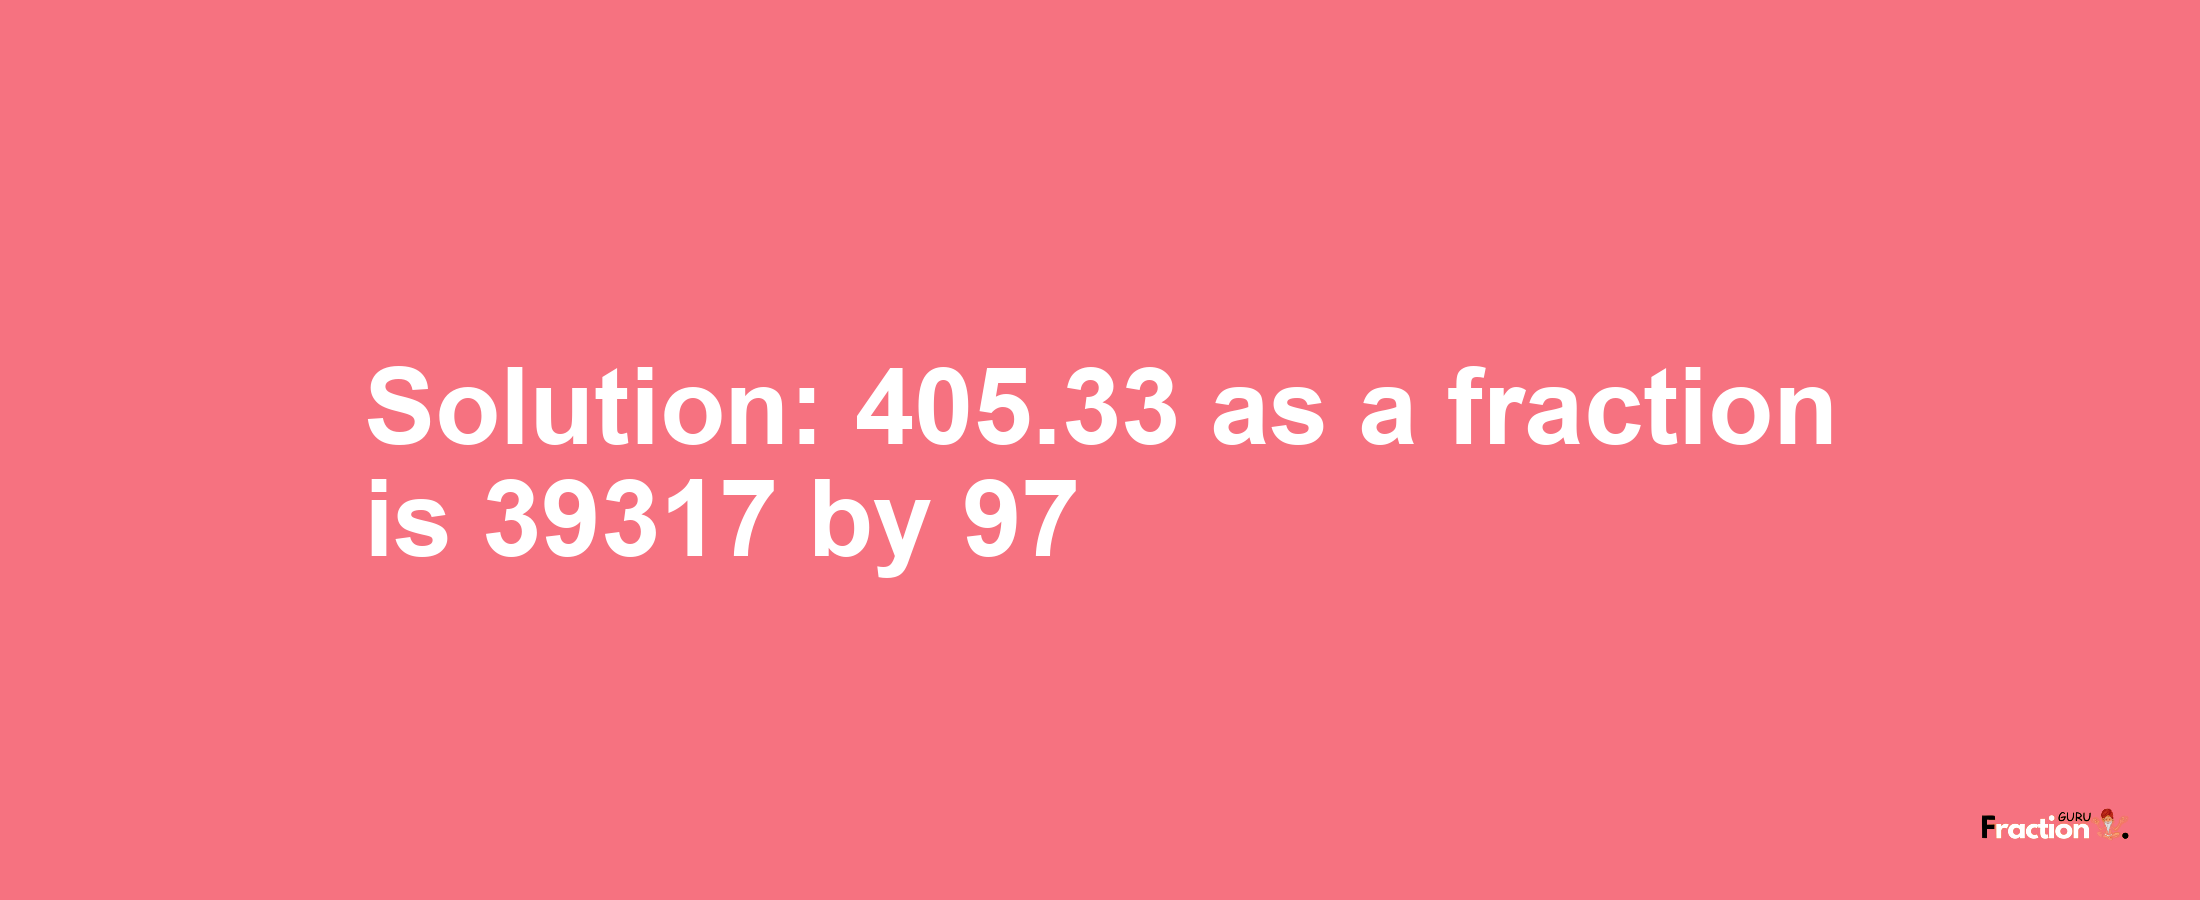 Solution:405.33 as a fraction is 39317/97